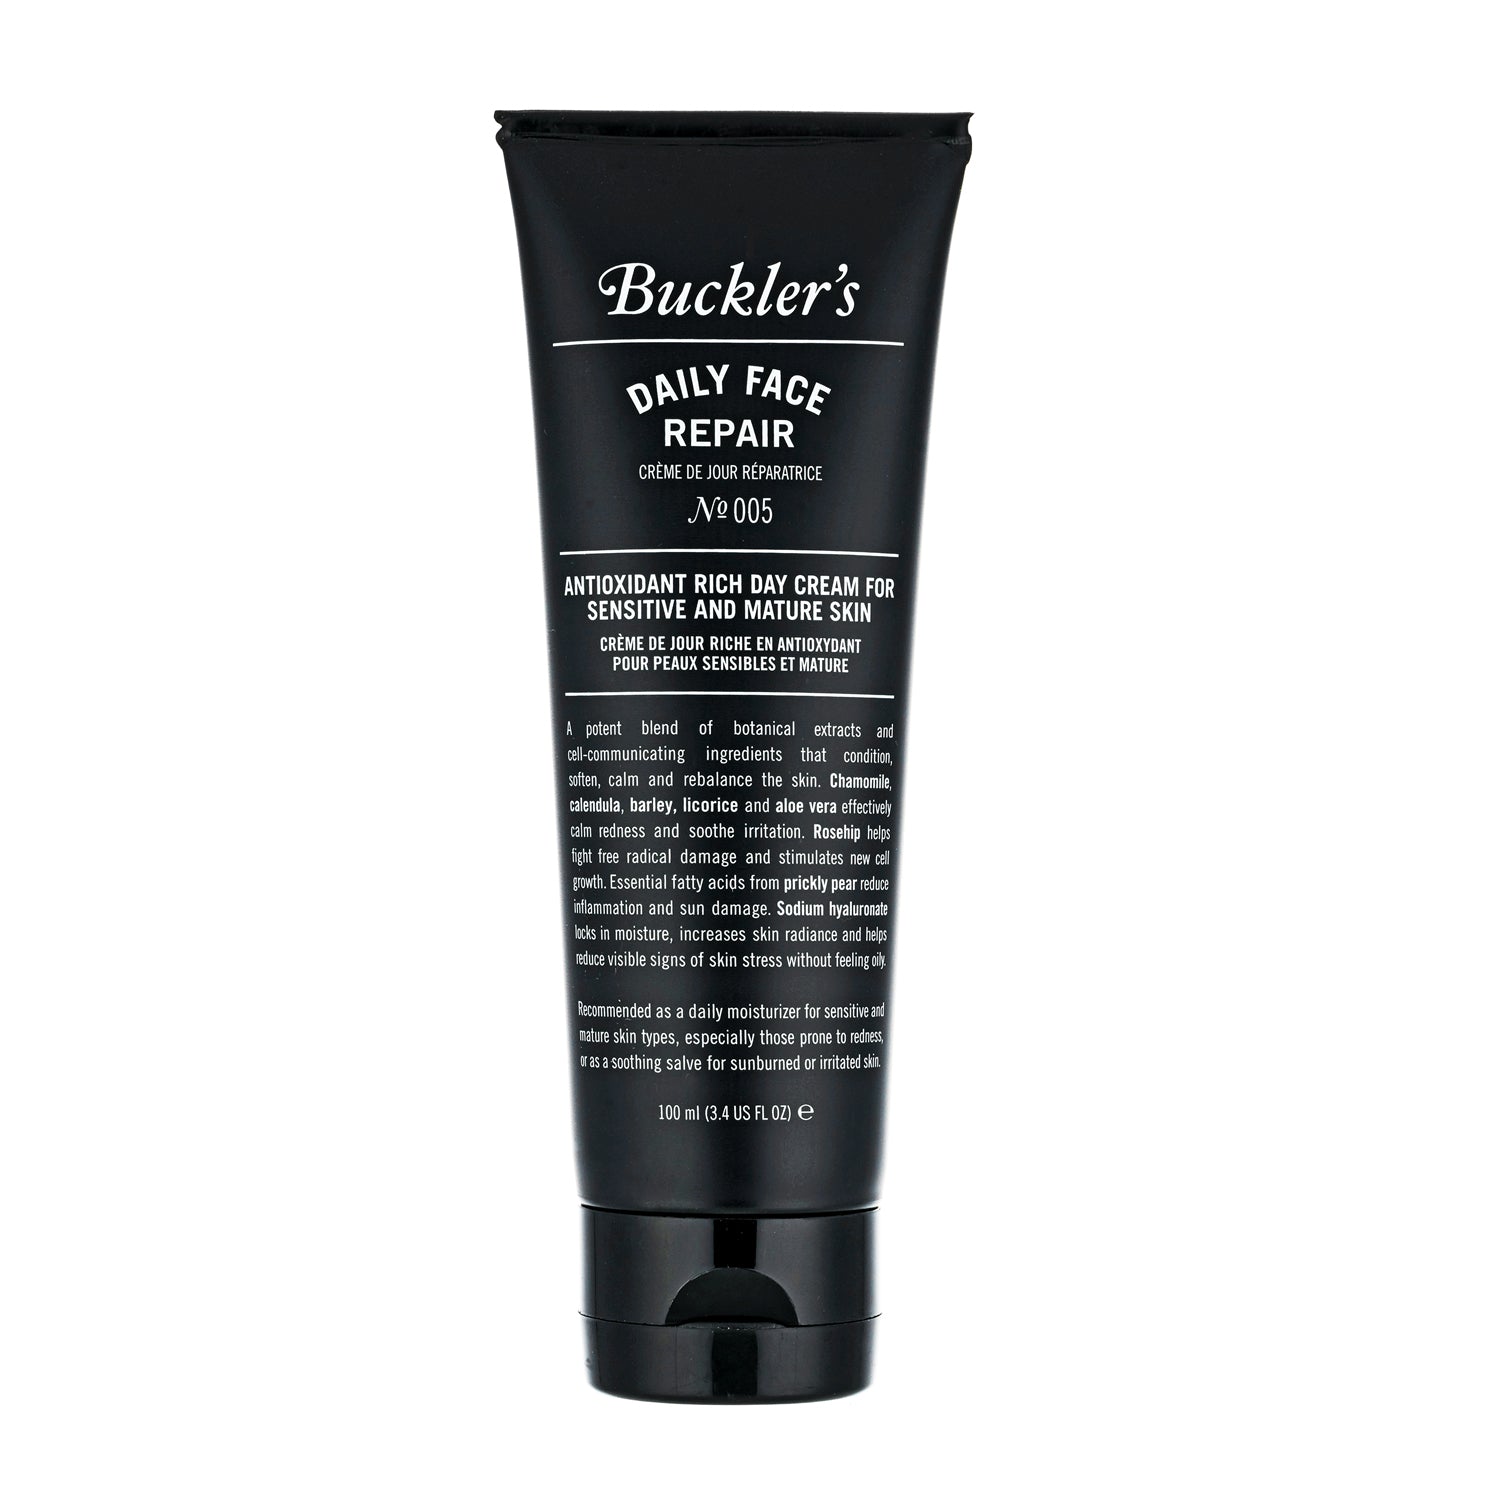 The Buckler's Daily Face Repair in a black tube with a black cap against a white background.